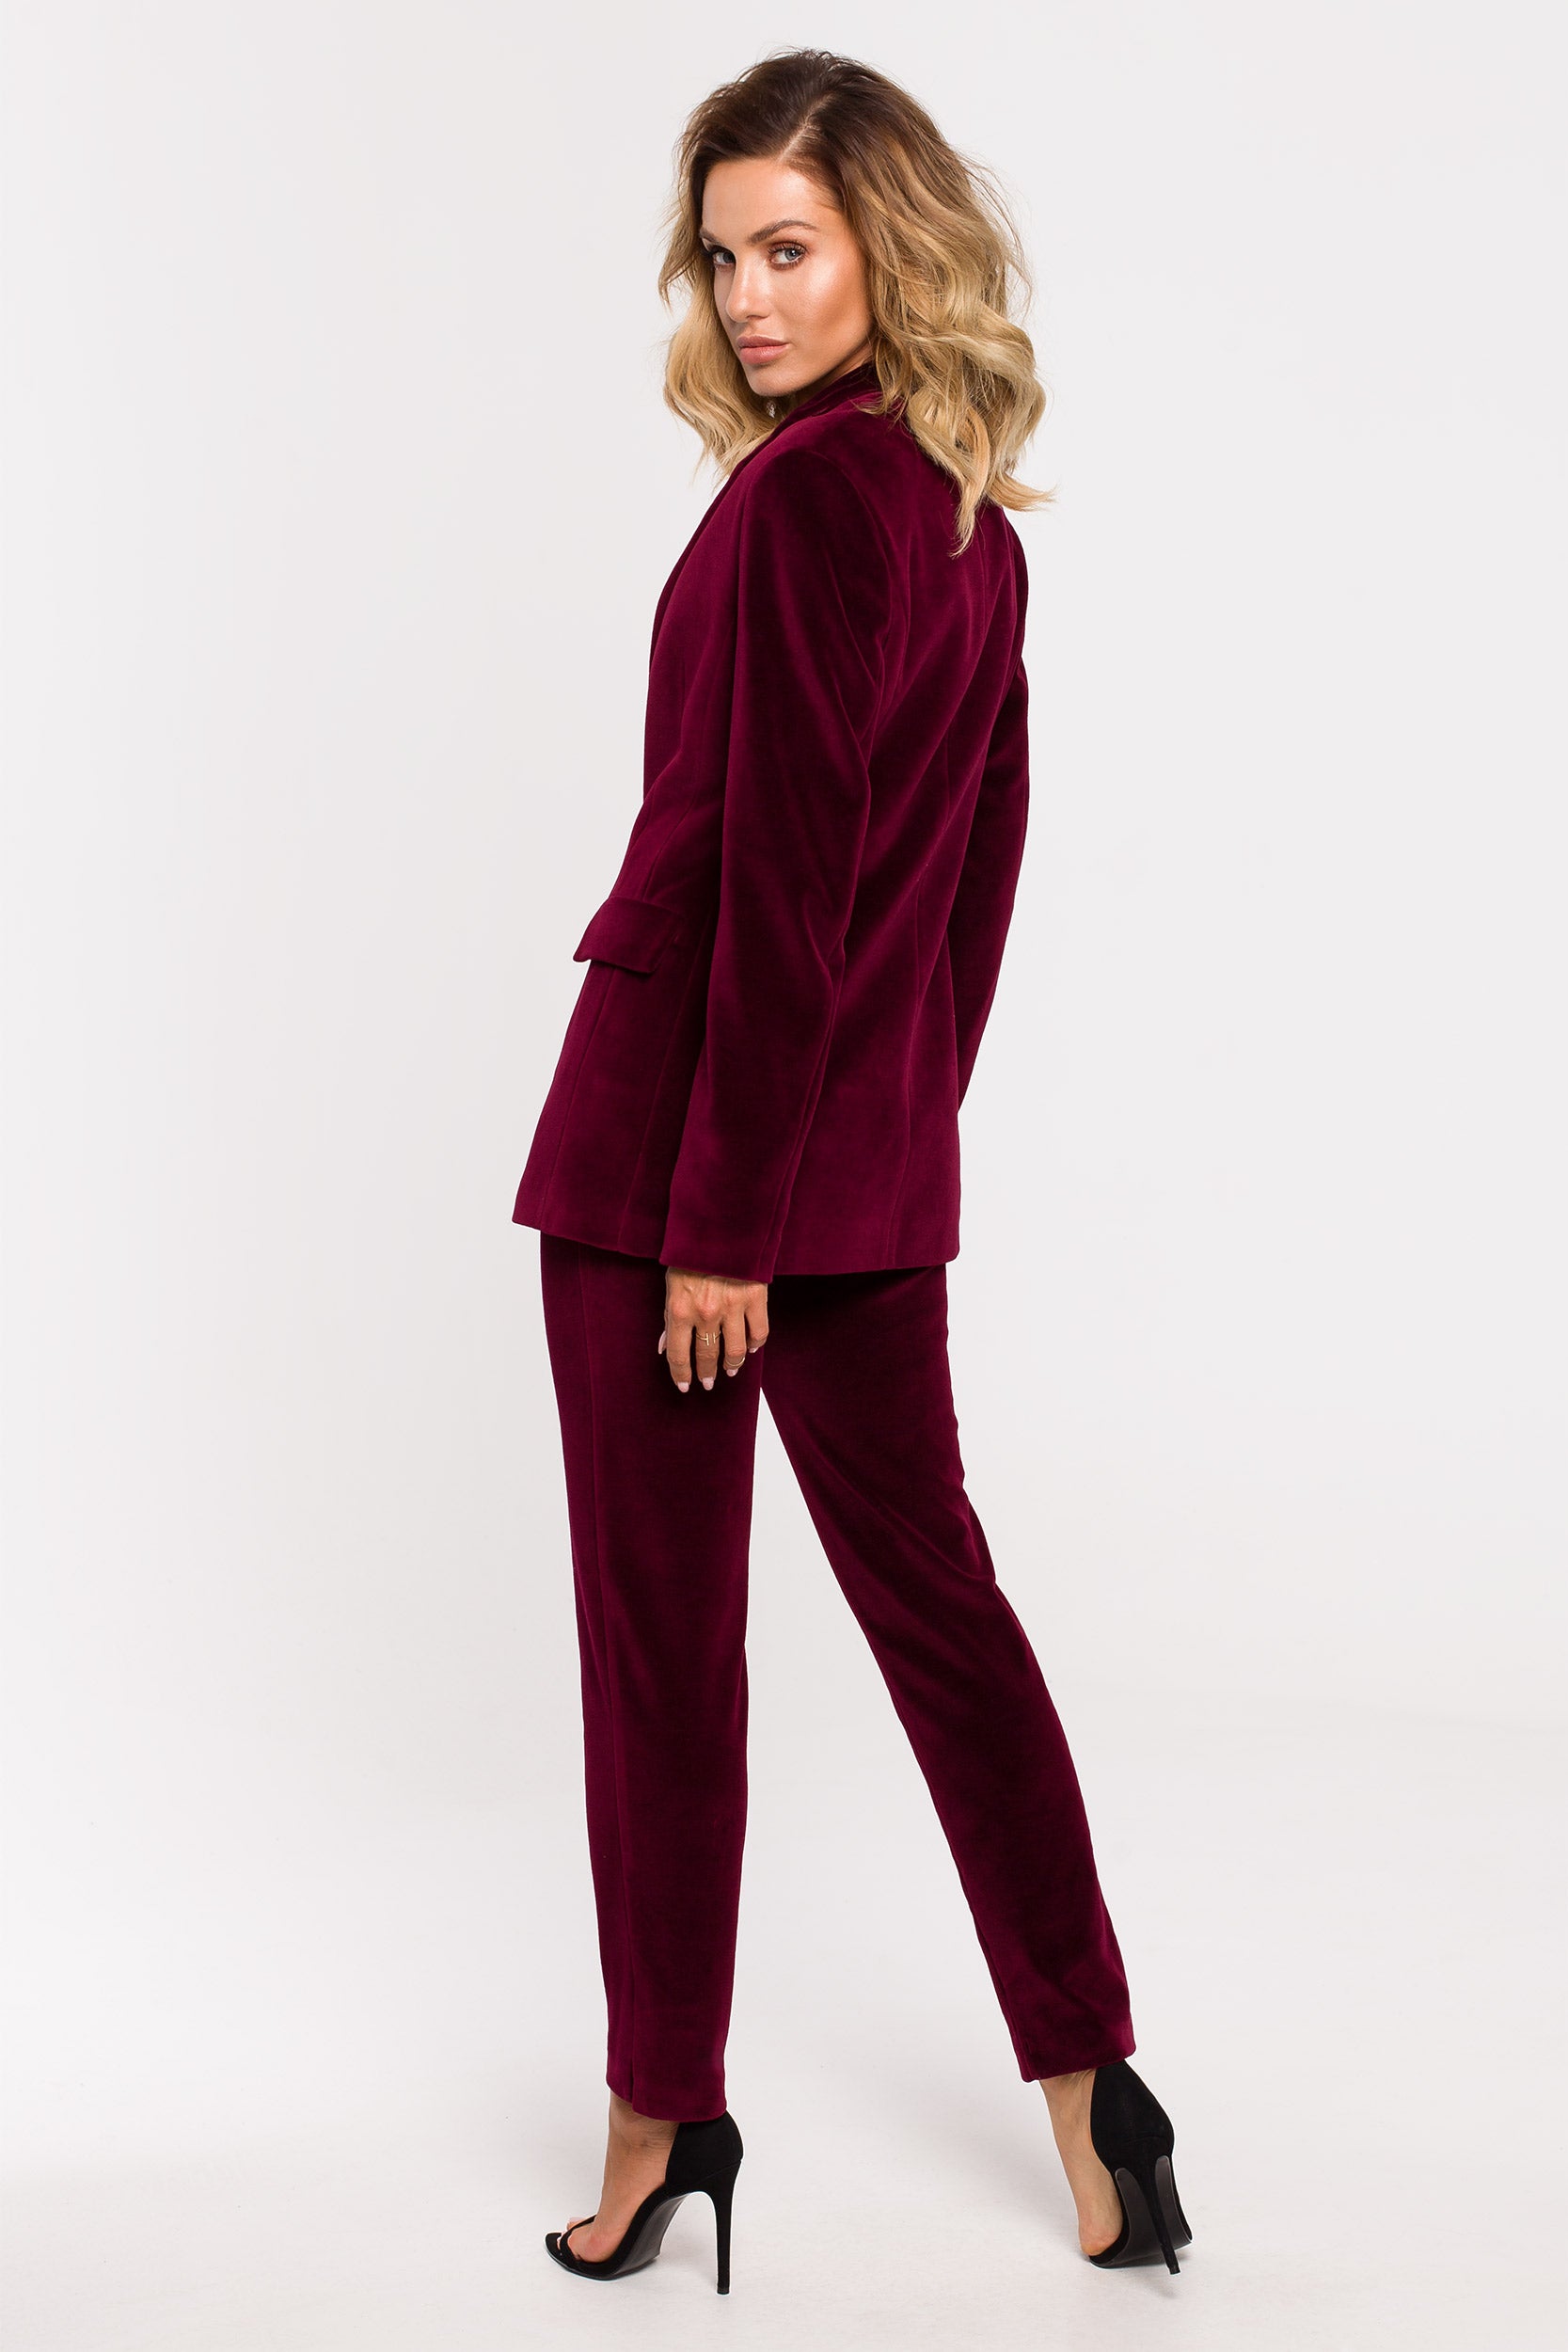 Buy Wine Trousers Suit Separate at Strictly